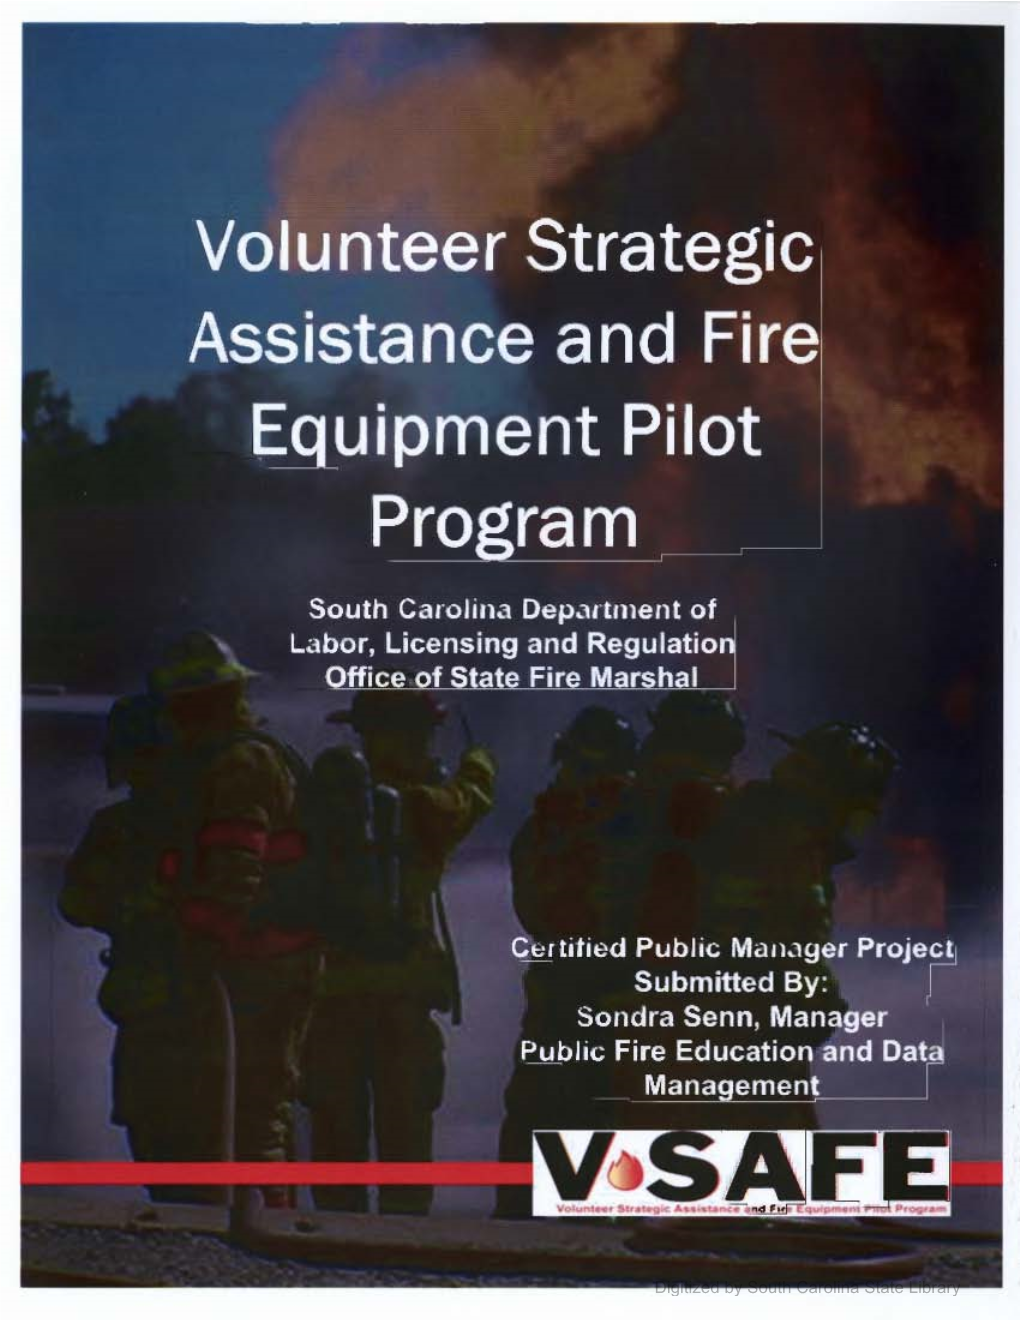 Digitized by South Carolina State Library VOLUNTEER STRATEGIC ASSISTANCE and FIRE EQUIPMENT PILOT PROGRAM